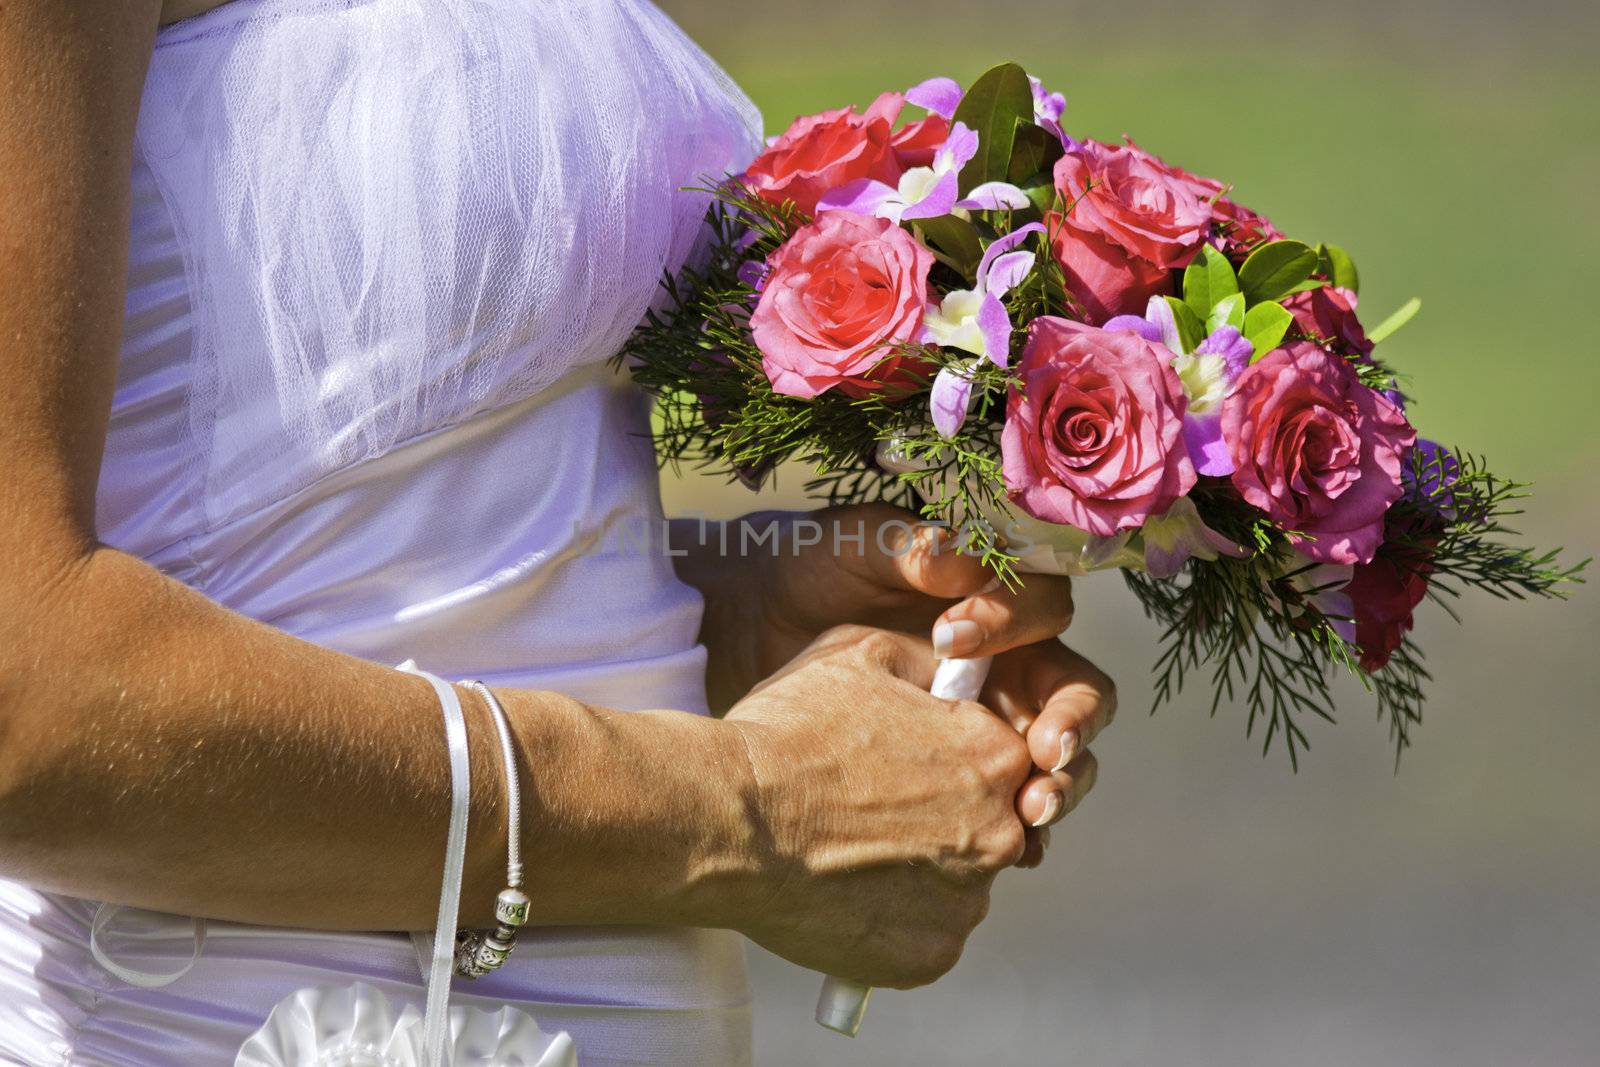 A closeup shot of a bride holding a beautiful bouquet of red and pink flowers on her wedding day